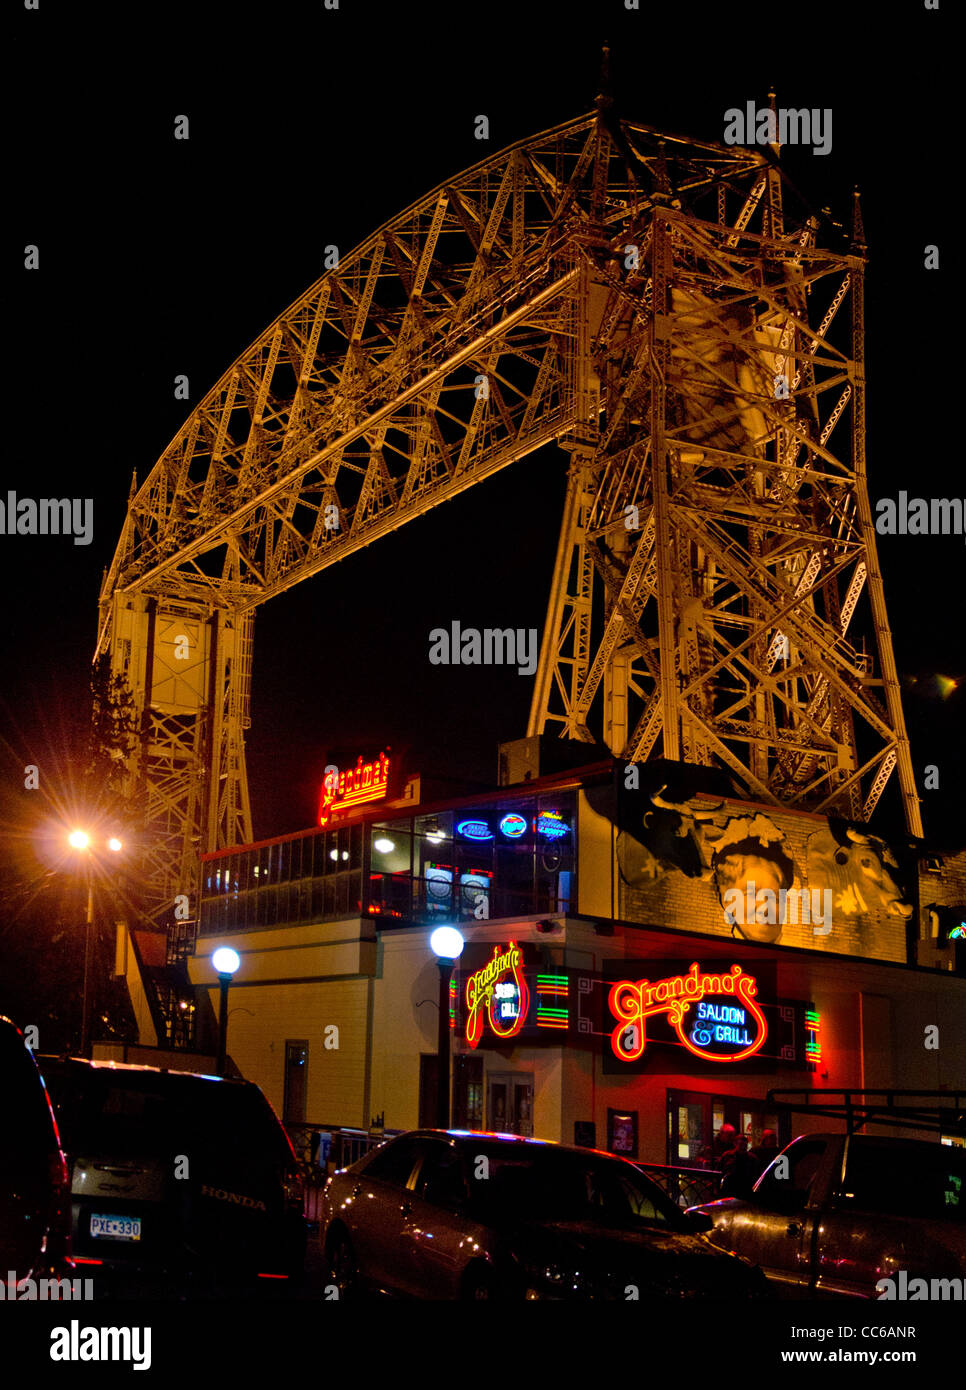 Grandma's Saloon and Grill restaurant next to the Aerial Lift Bridge in Duluth, Minnesota Stock Photo